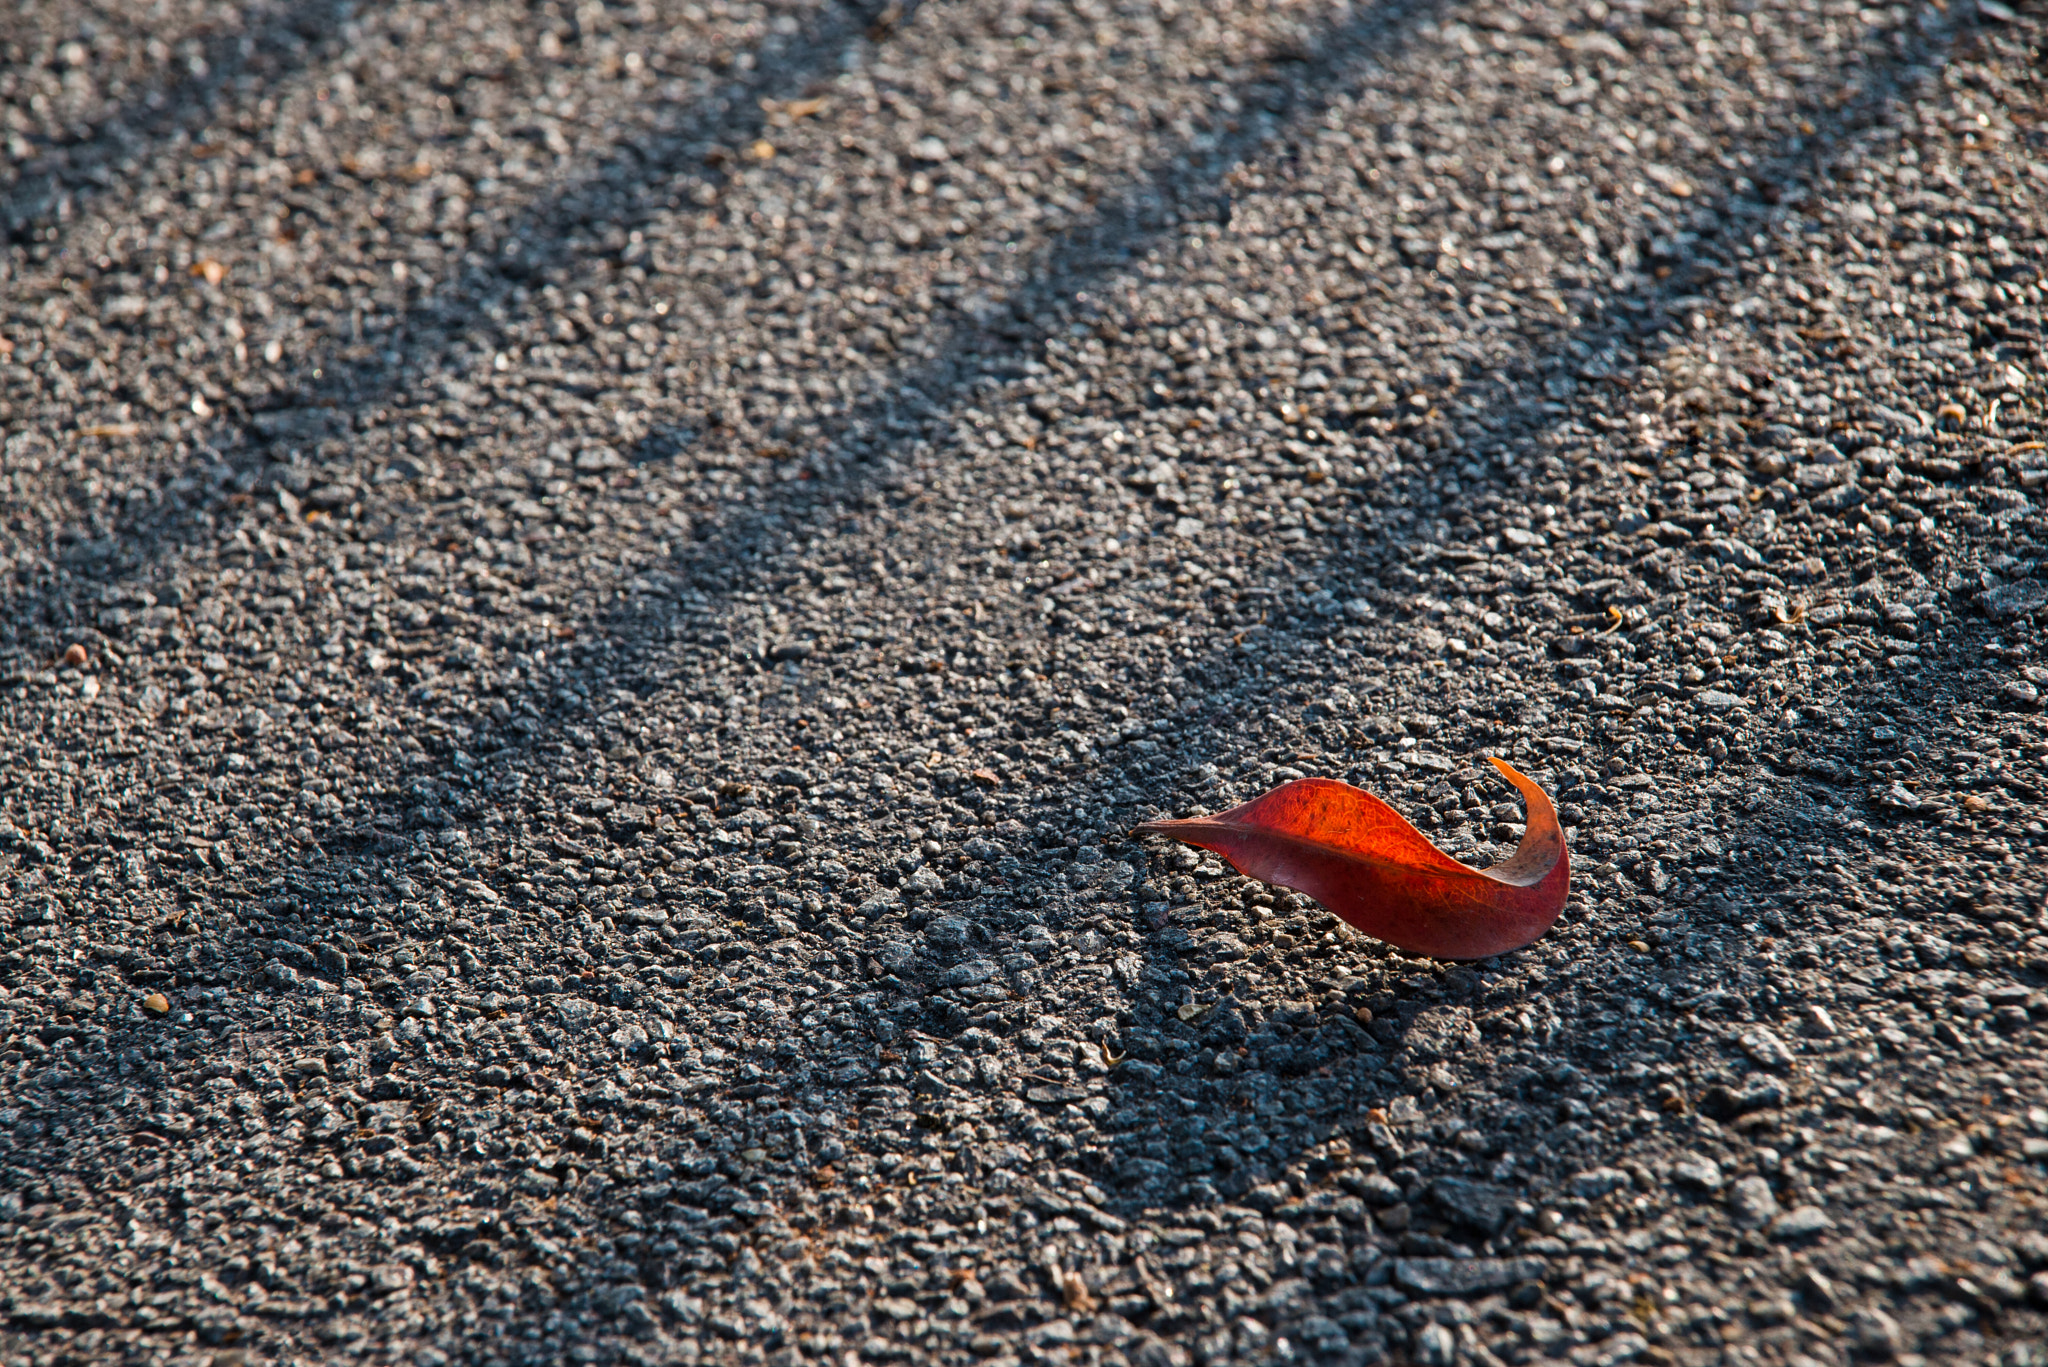 Nikon D600 + Tamron SP AF 24-135mm f/3.5-5.6 AD Aspherical (IF) Macro (190D) sample photo. Red leaf fallen on pavement photography